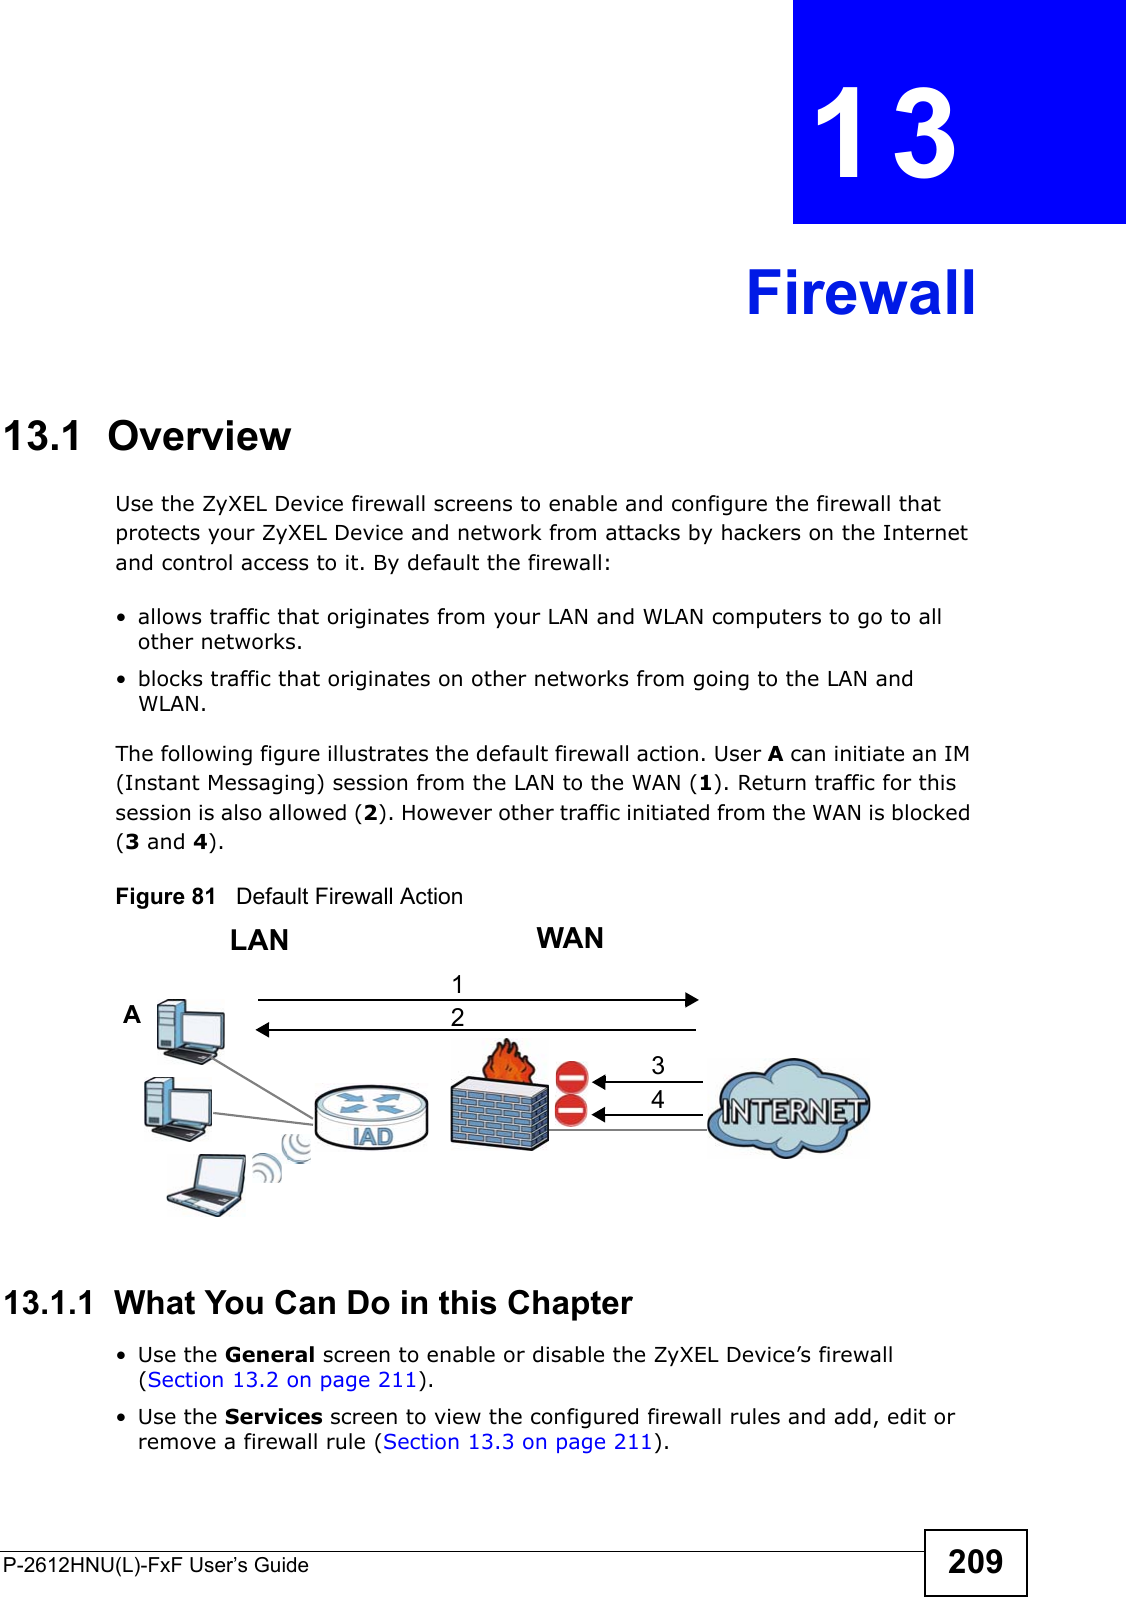 P-2612HNU(L)-FxF User’s Guide 209CHAPTER   13 Firewall13.1  OverviewUse the ZyXEL Device firewall screens to enable and configure the firewall thatprotects your ZyXEL Device and network from attacks by hackers on the Internet and control access to it. By default the firewall:• allows traffic that originates from your LAN and WLAN computers to go to all other networks. • blocks traffic that originates on other networks from going to the LAN and WLAN. The following figure illustrates the default firewall action. User A can initiate an IM (Instant Messaging) session from the LAN to the WAN (1). Return traffic for thissession is also allowed (2). However other traffic initiated from the WAN is blocked (3 and 4).Figure 81   Default Firewall Action13.1.1  What You Can Do in this Chapter• Use the General screen to enable or disable the ZyXEL Device’s firewall (Section 13.2 on page 211).• Use the Services screen to view the configured firewall rules and add, edit orremove a firewall rule (Section 13.3 on page 211).WANLAN3412A